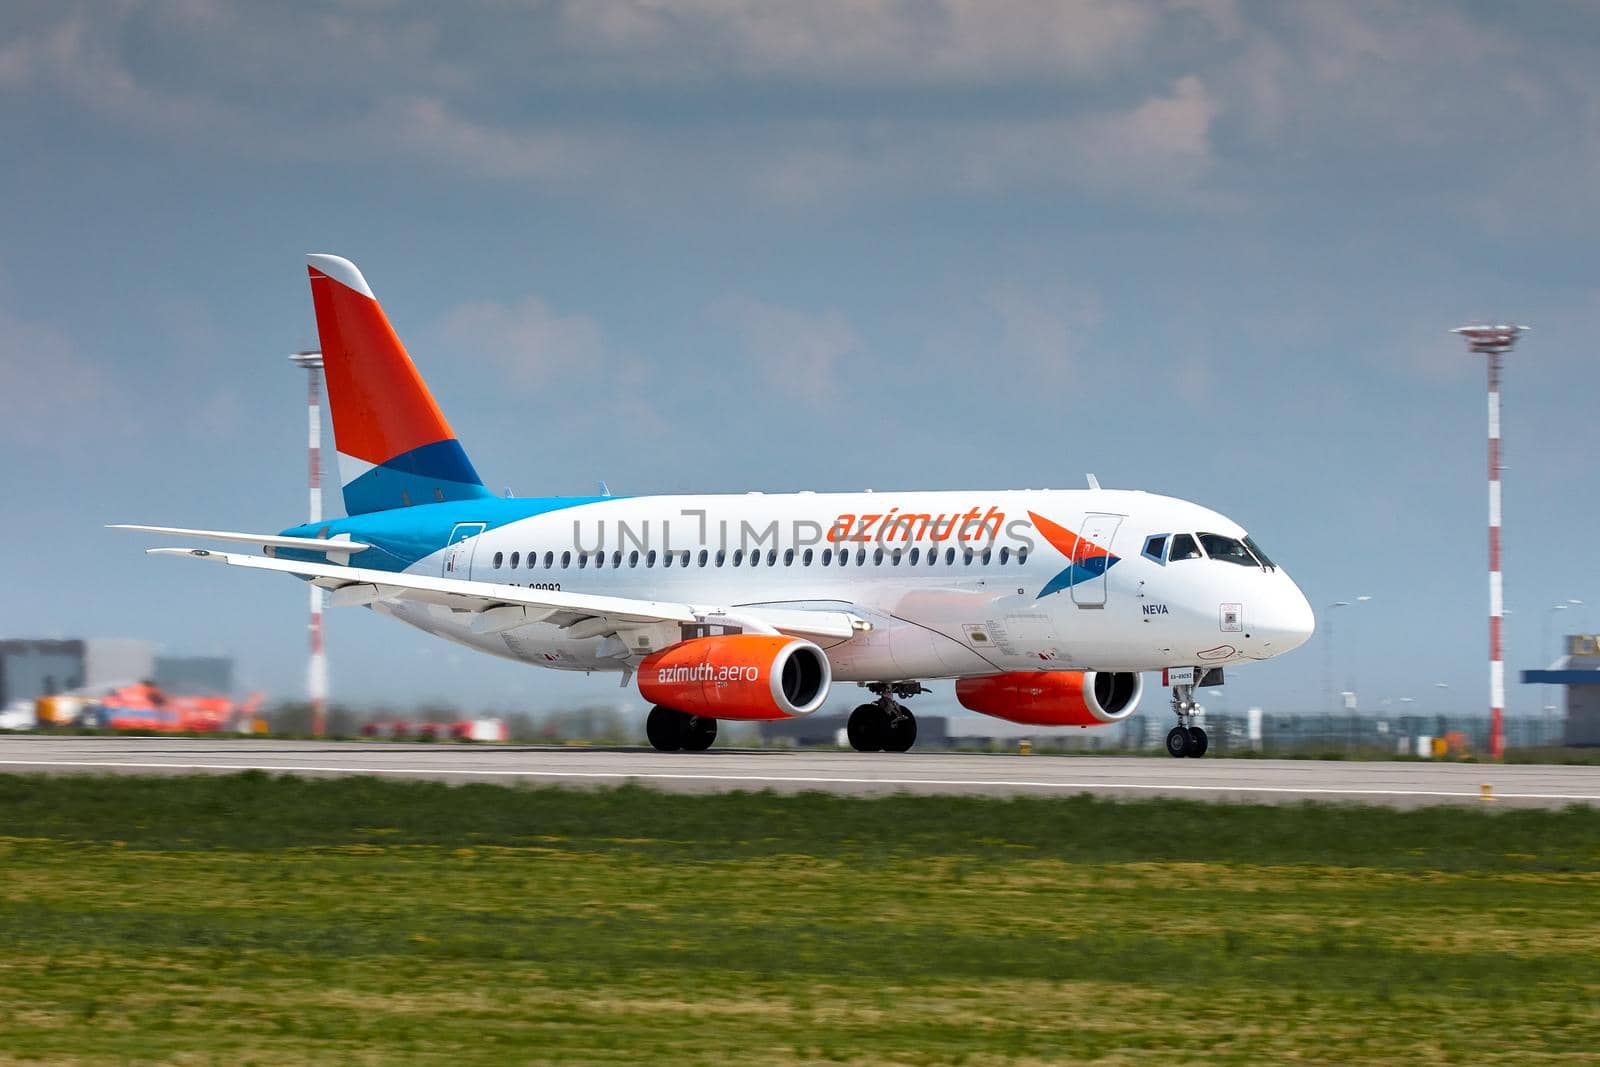 Aircraft Sukhoi Superjet 100 RA-89079 Azimut airlines takes off in airport Platov. Spotting at the airport Platov. 24.05.2019 ROSTOV-ON-DON, RUSSIA.